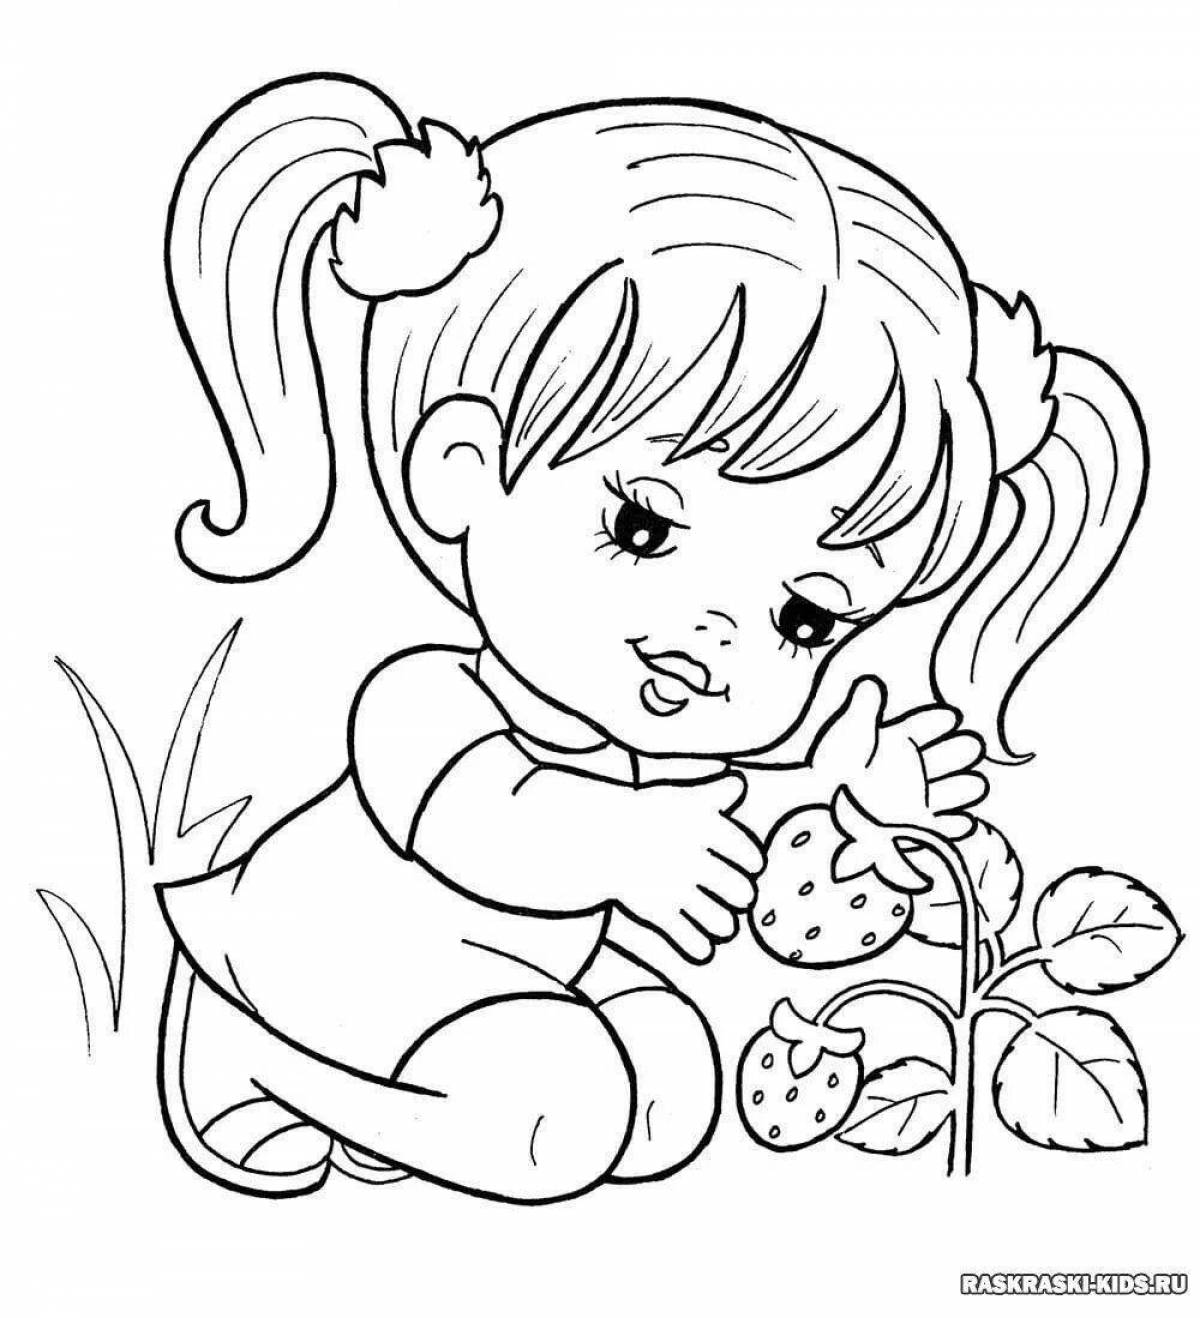 Fairytale coloring book for girls 3-5 years old